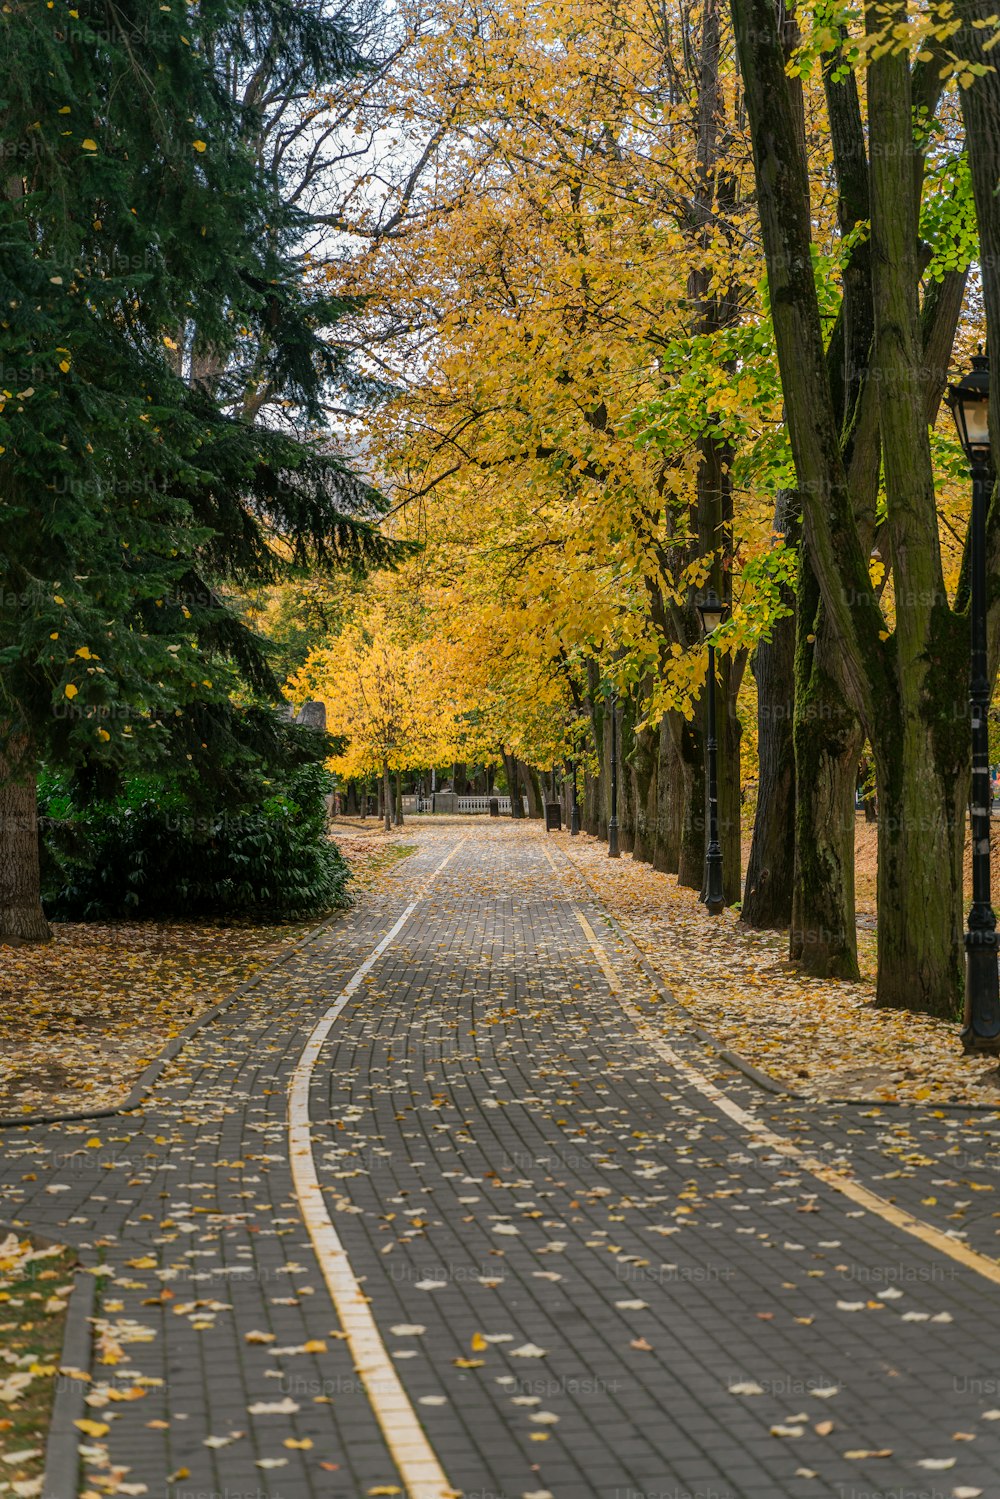 a brick road with trees lining both sides of it